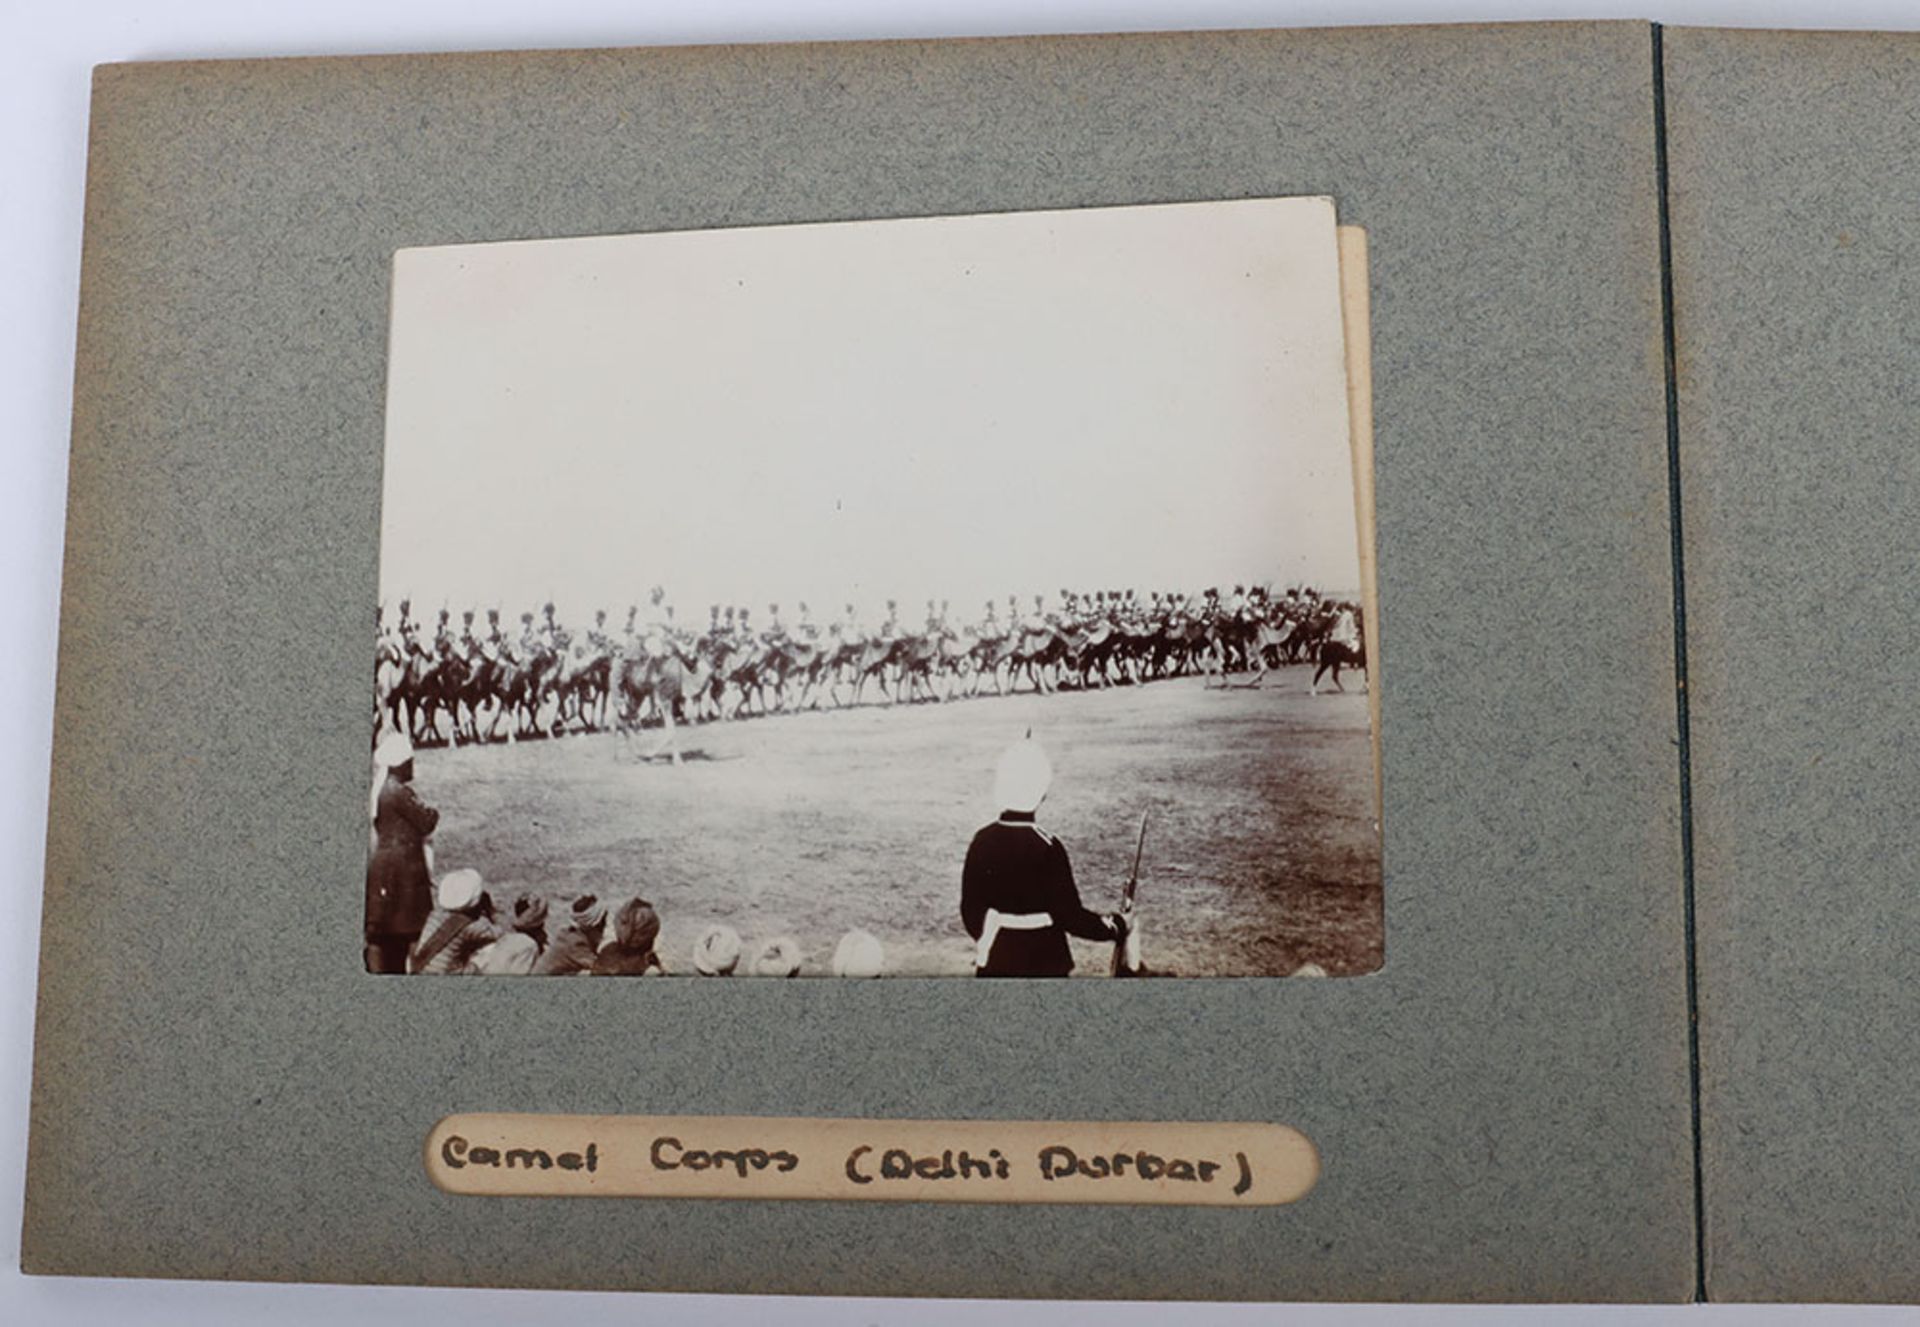 Photograph Album with images of ther Delhi Durbar, troops lining streets, Elephants, sacred cows bel - Image 42 of 48